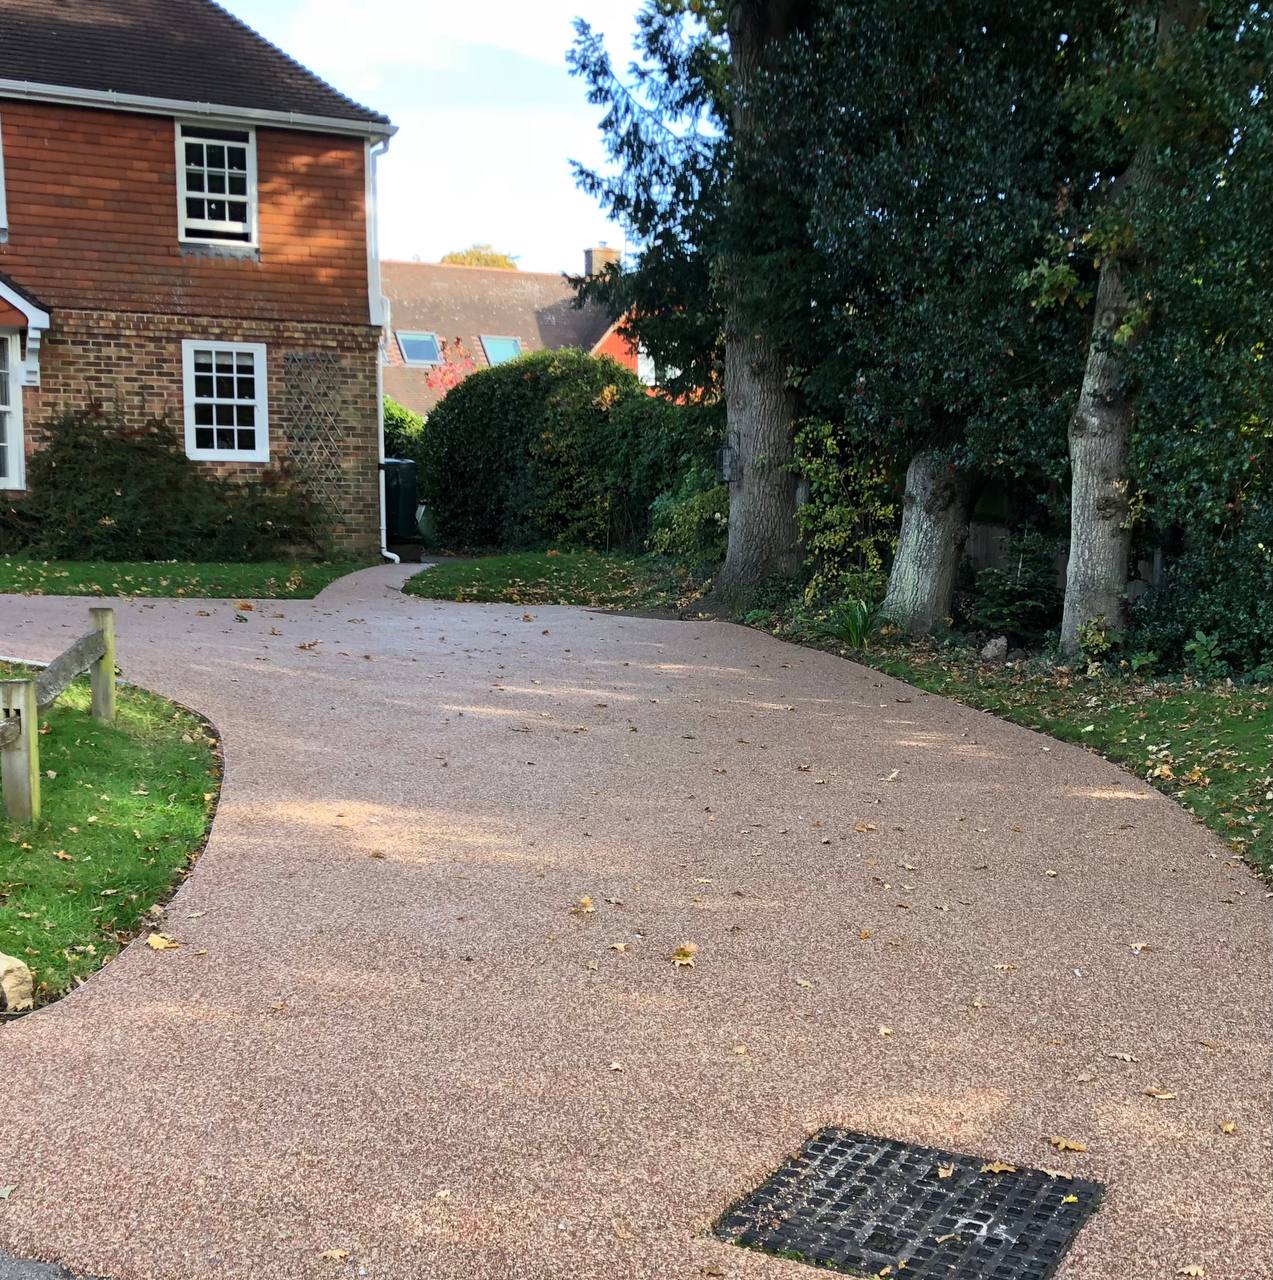 This is a photo of a Resin bound driveway carried out in a district of Liverpool. All works done by Resin Driveways Liverpool